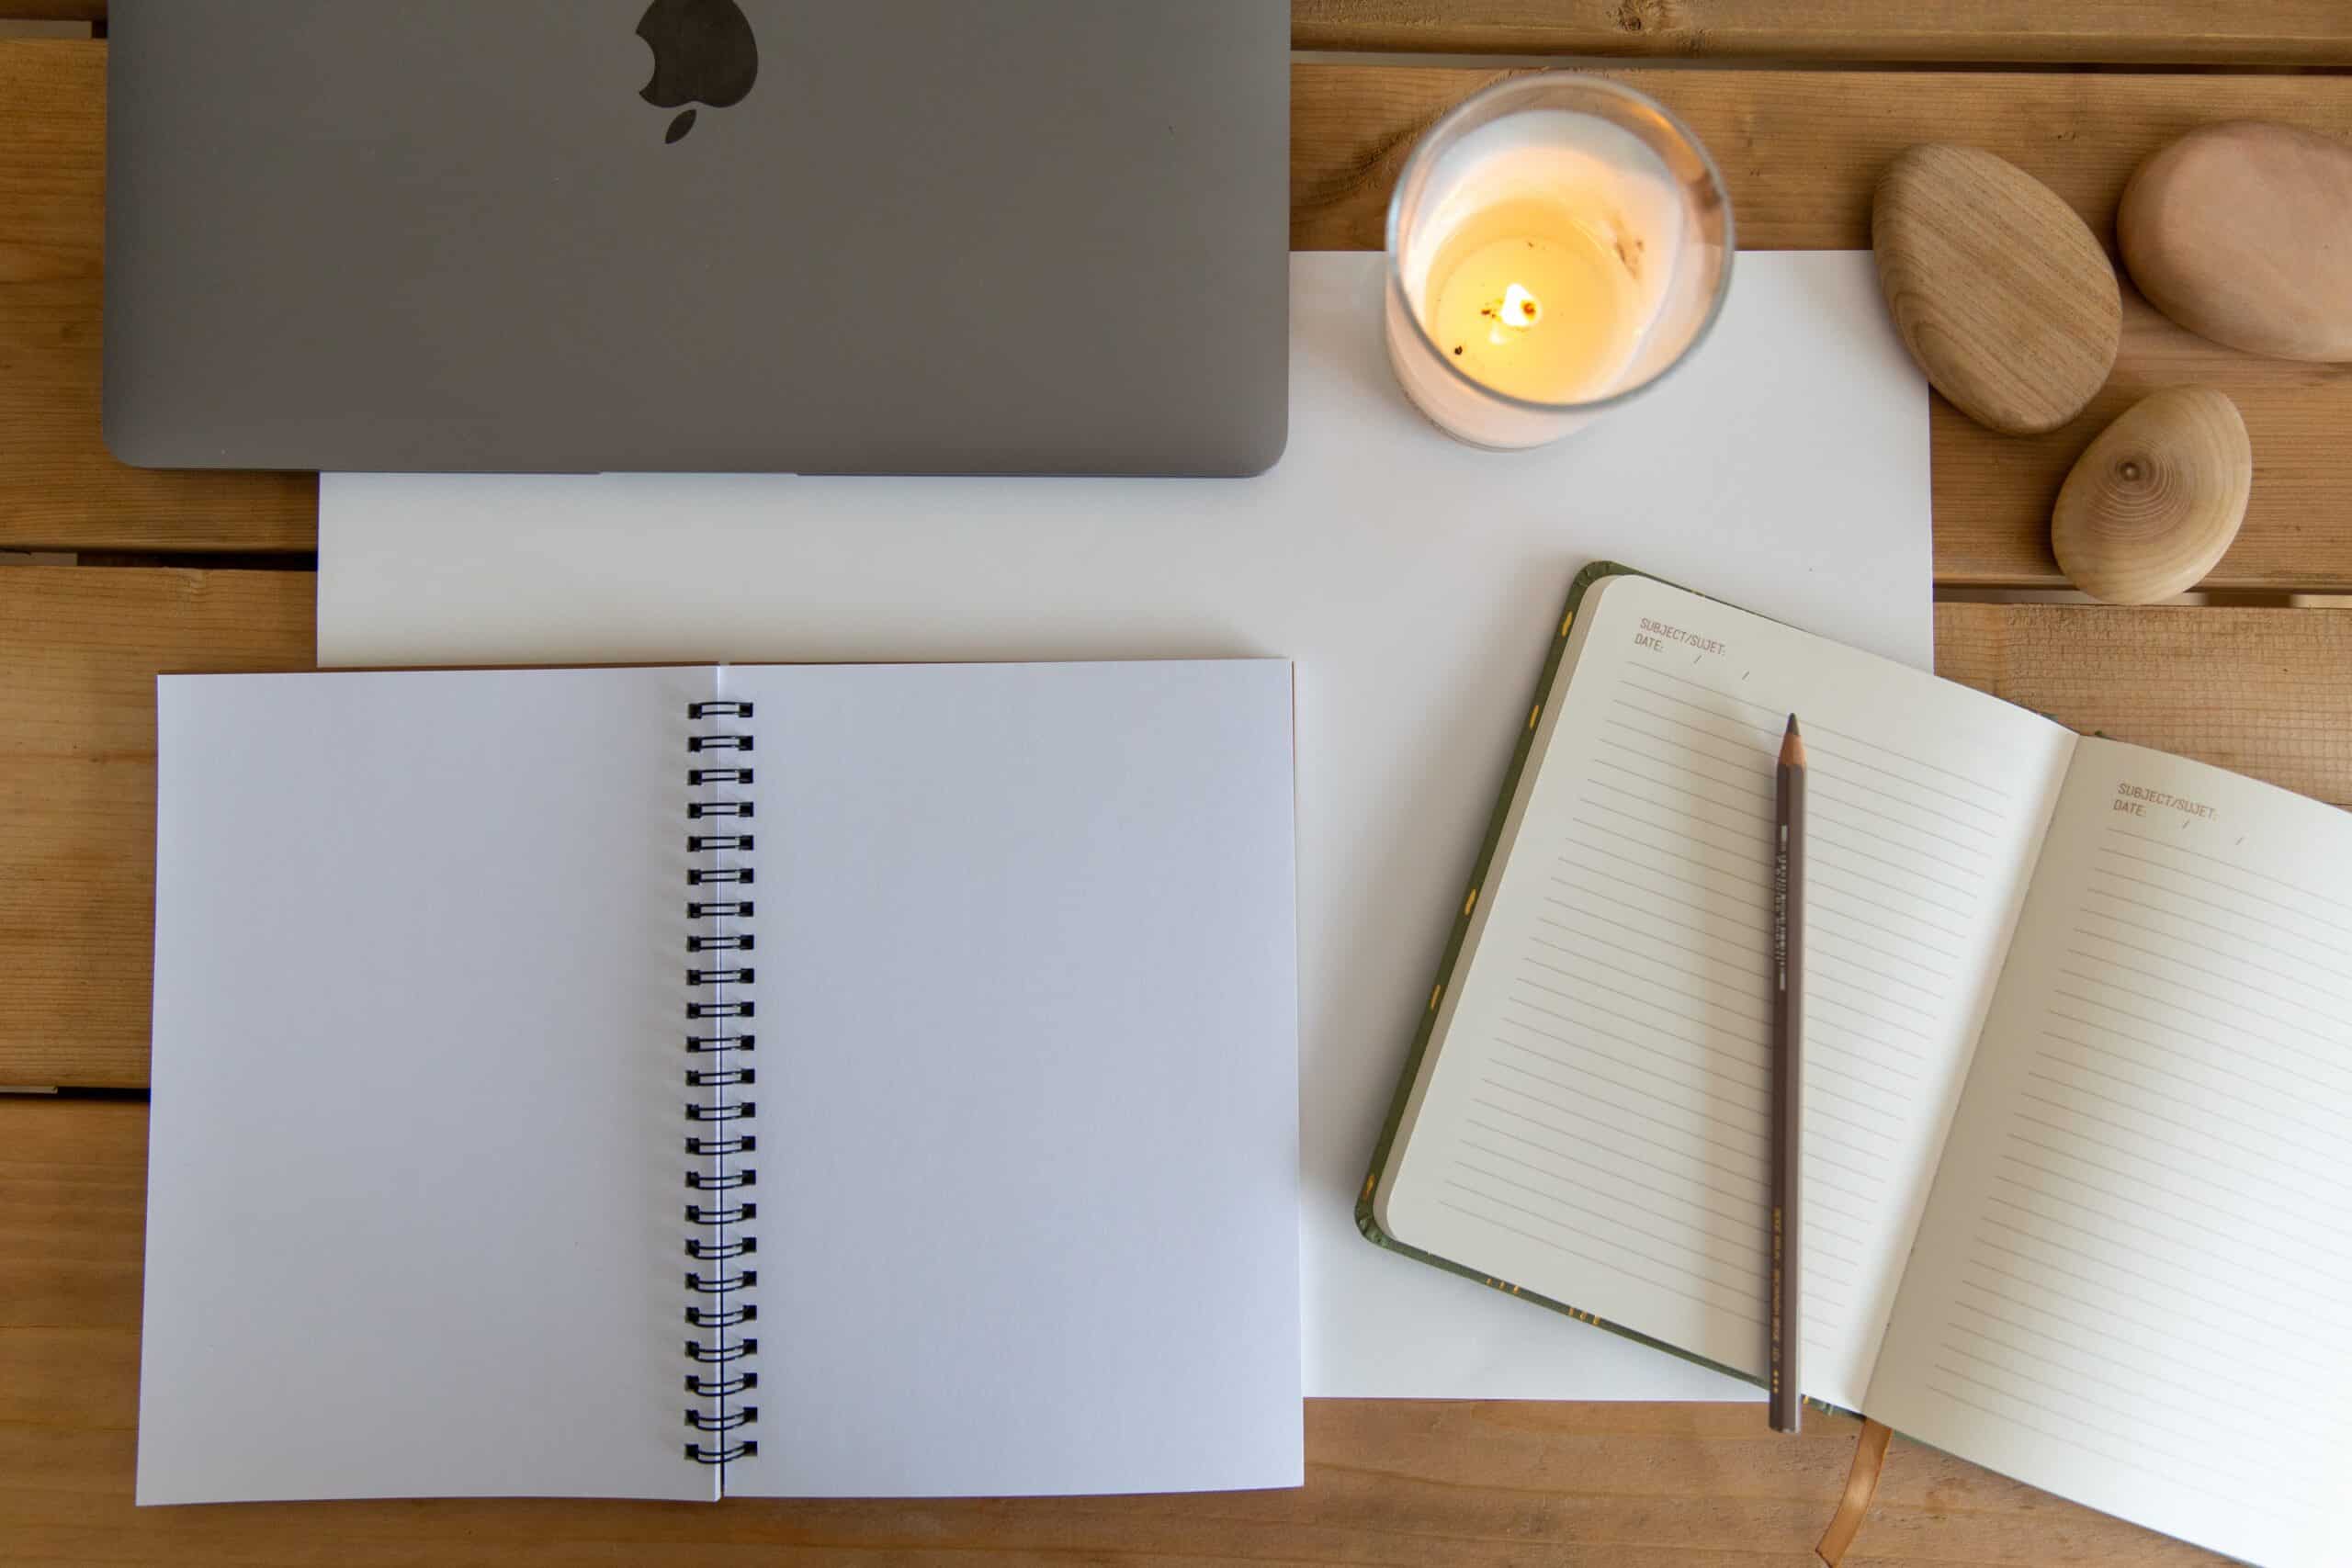 A blank notebook and journal site on a desk next to a laptop and a candle